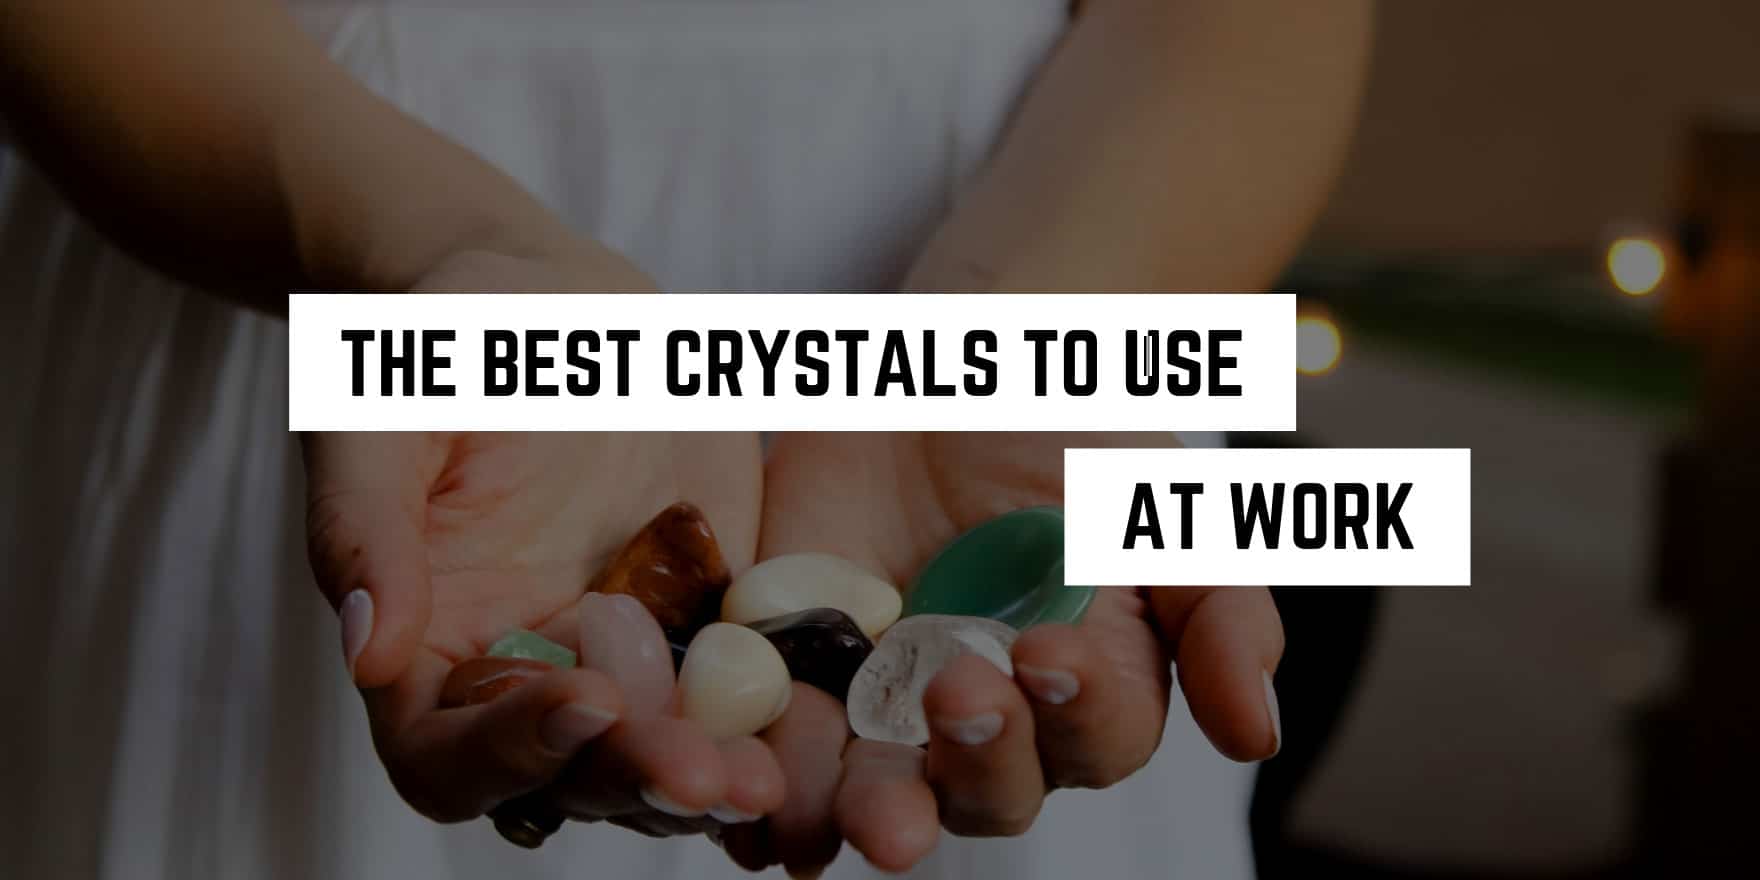 The Best Crystals to Use in the Workplace